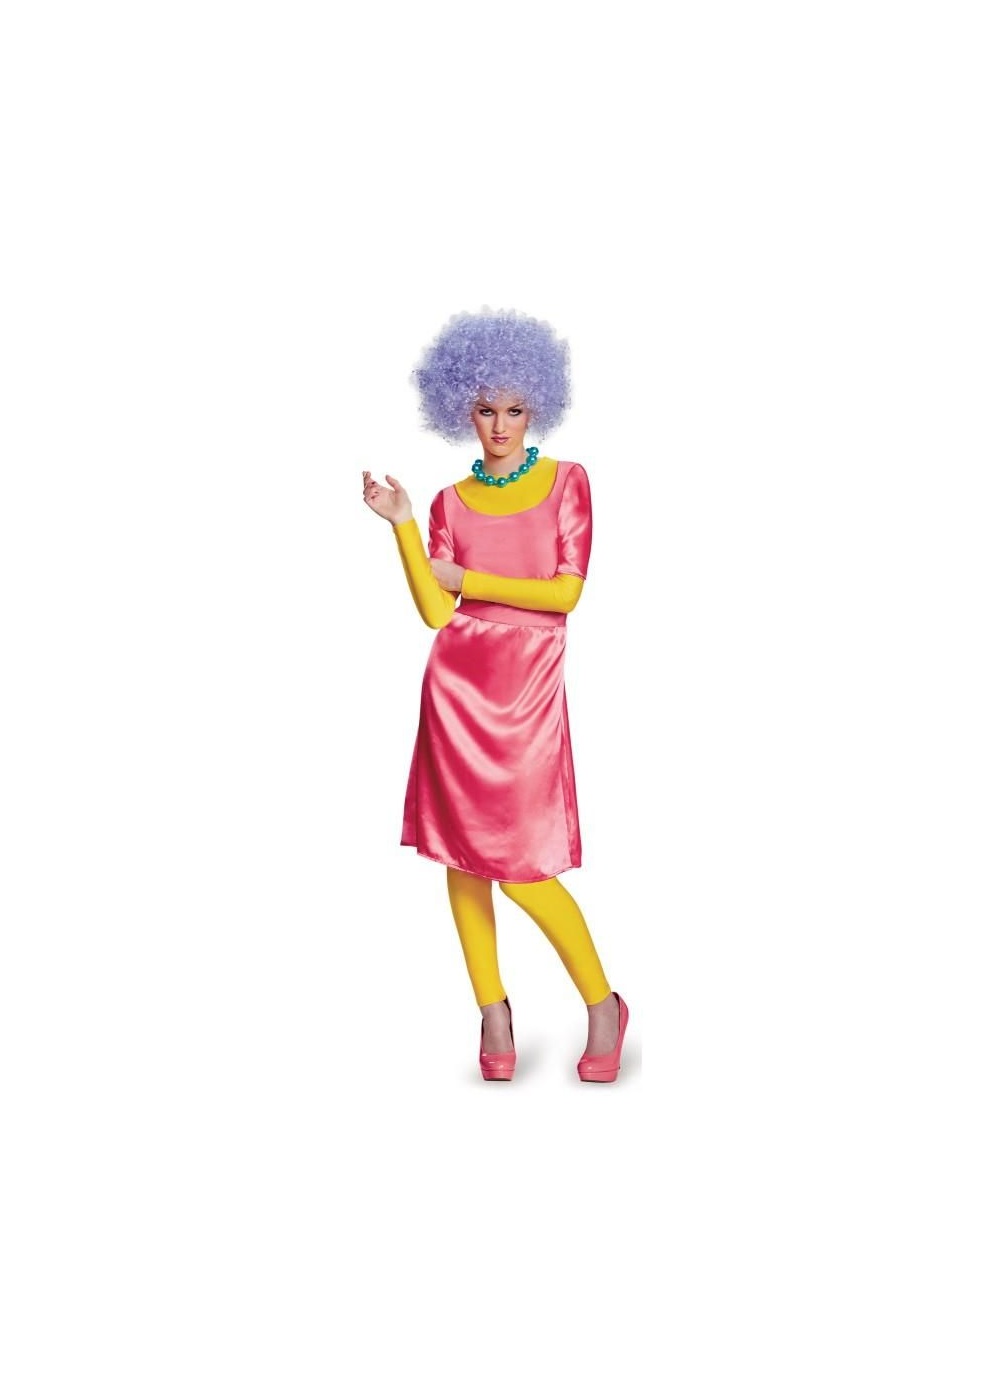 The Simpsons Homer Simpson Deluxe Adult Costume